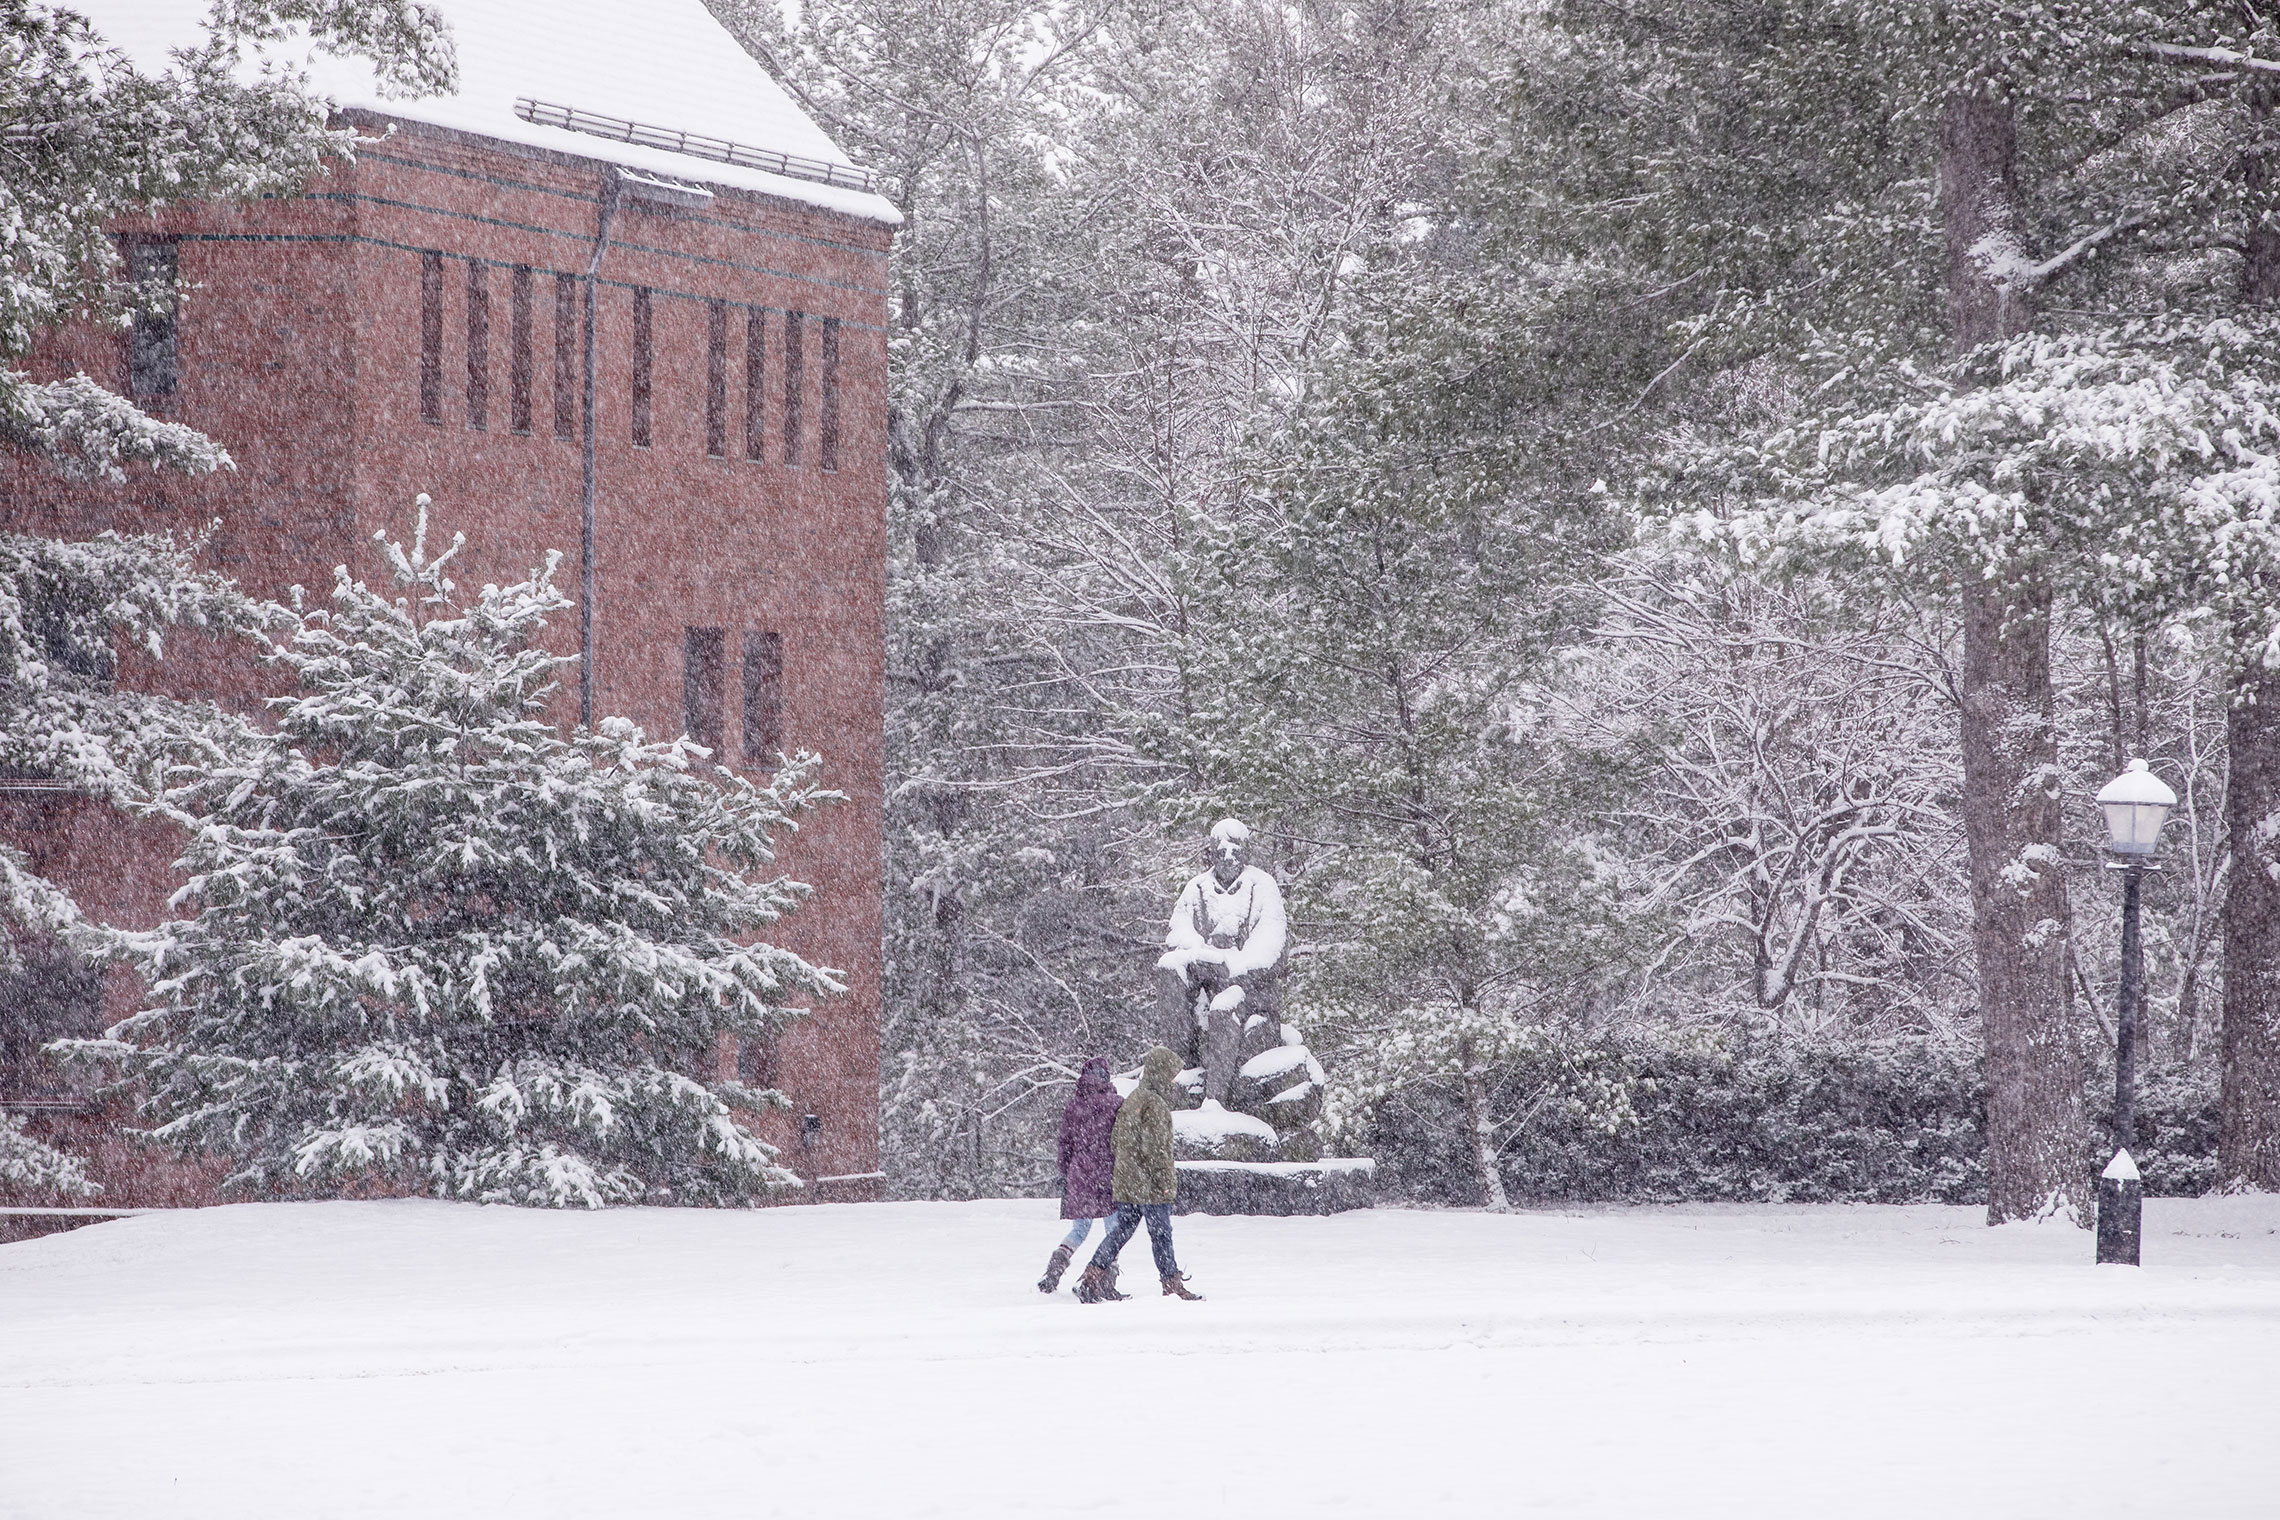 Students passing by a statue of Robert Frost on a snowy day.